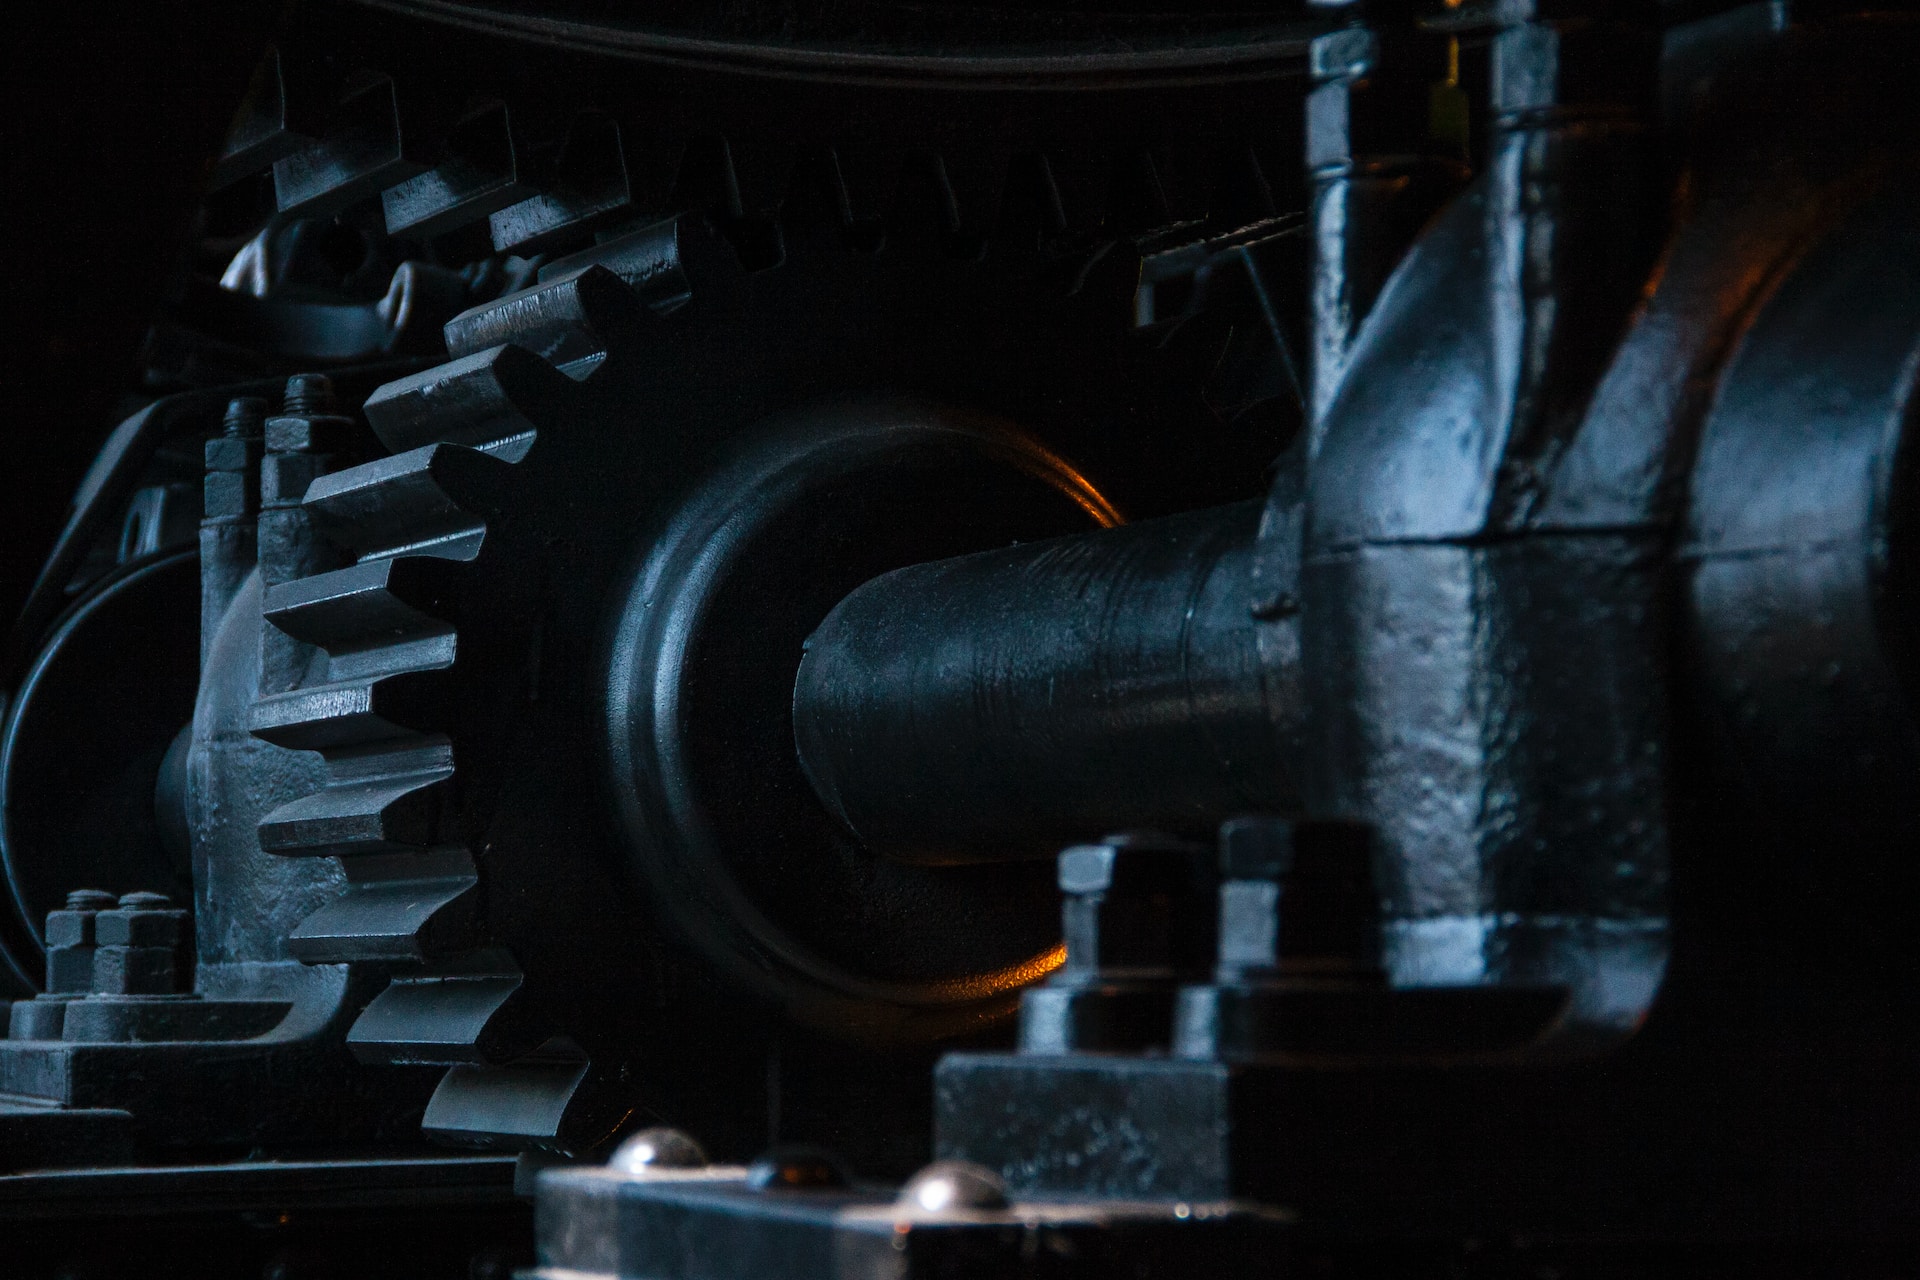 Industrial machinery with a large gear